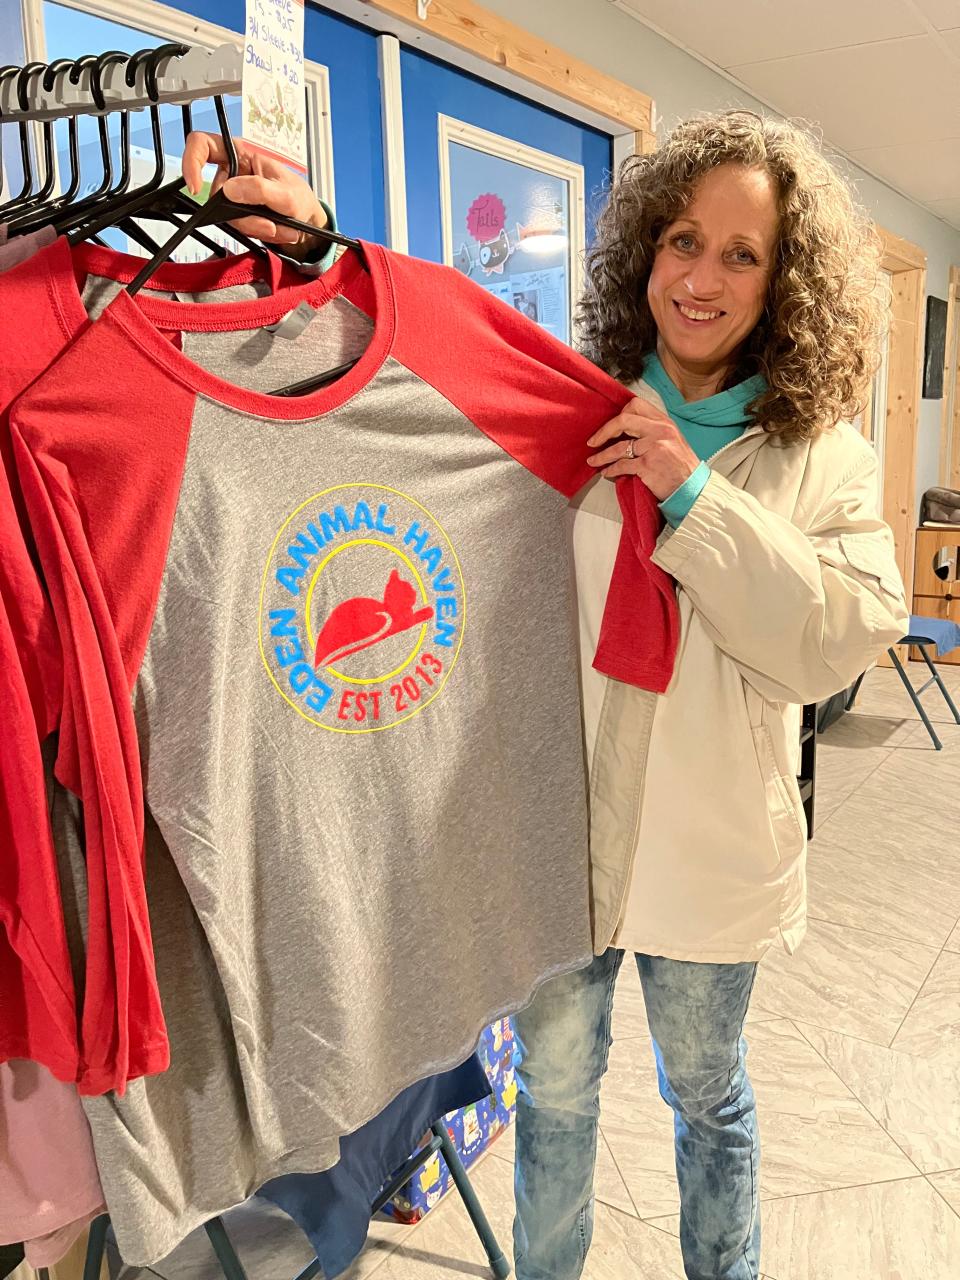 Leslie Sawyer, director of Eden Animal Haven, stands with a shirt bearing the shelter’s new logo. The shirts are on sale for $25 in short sleeves and $30 in three-quarter-length sleeves.